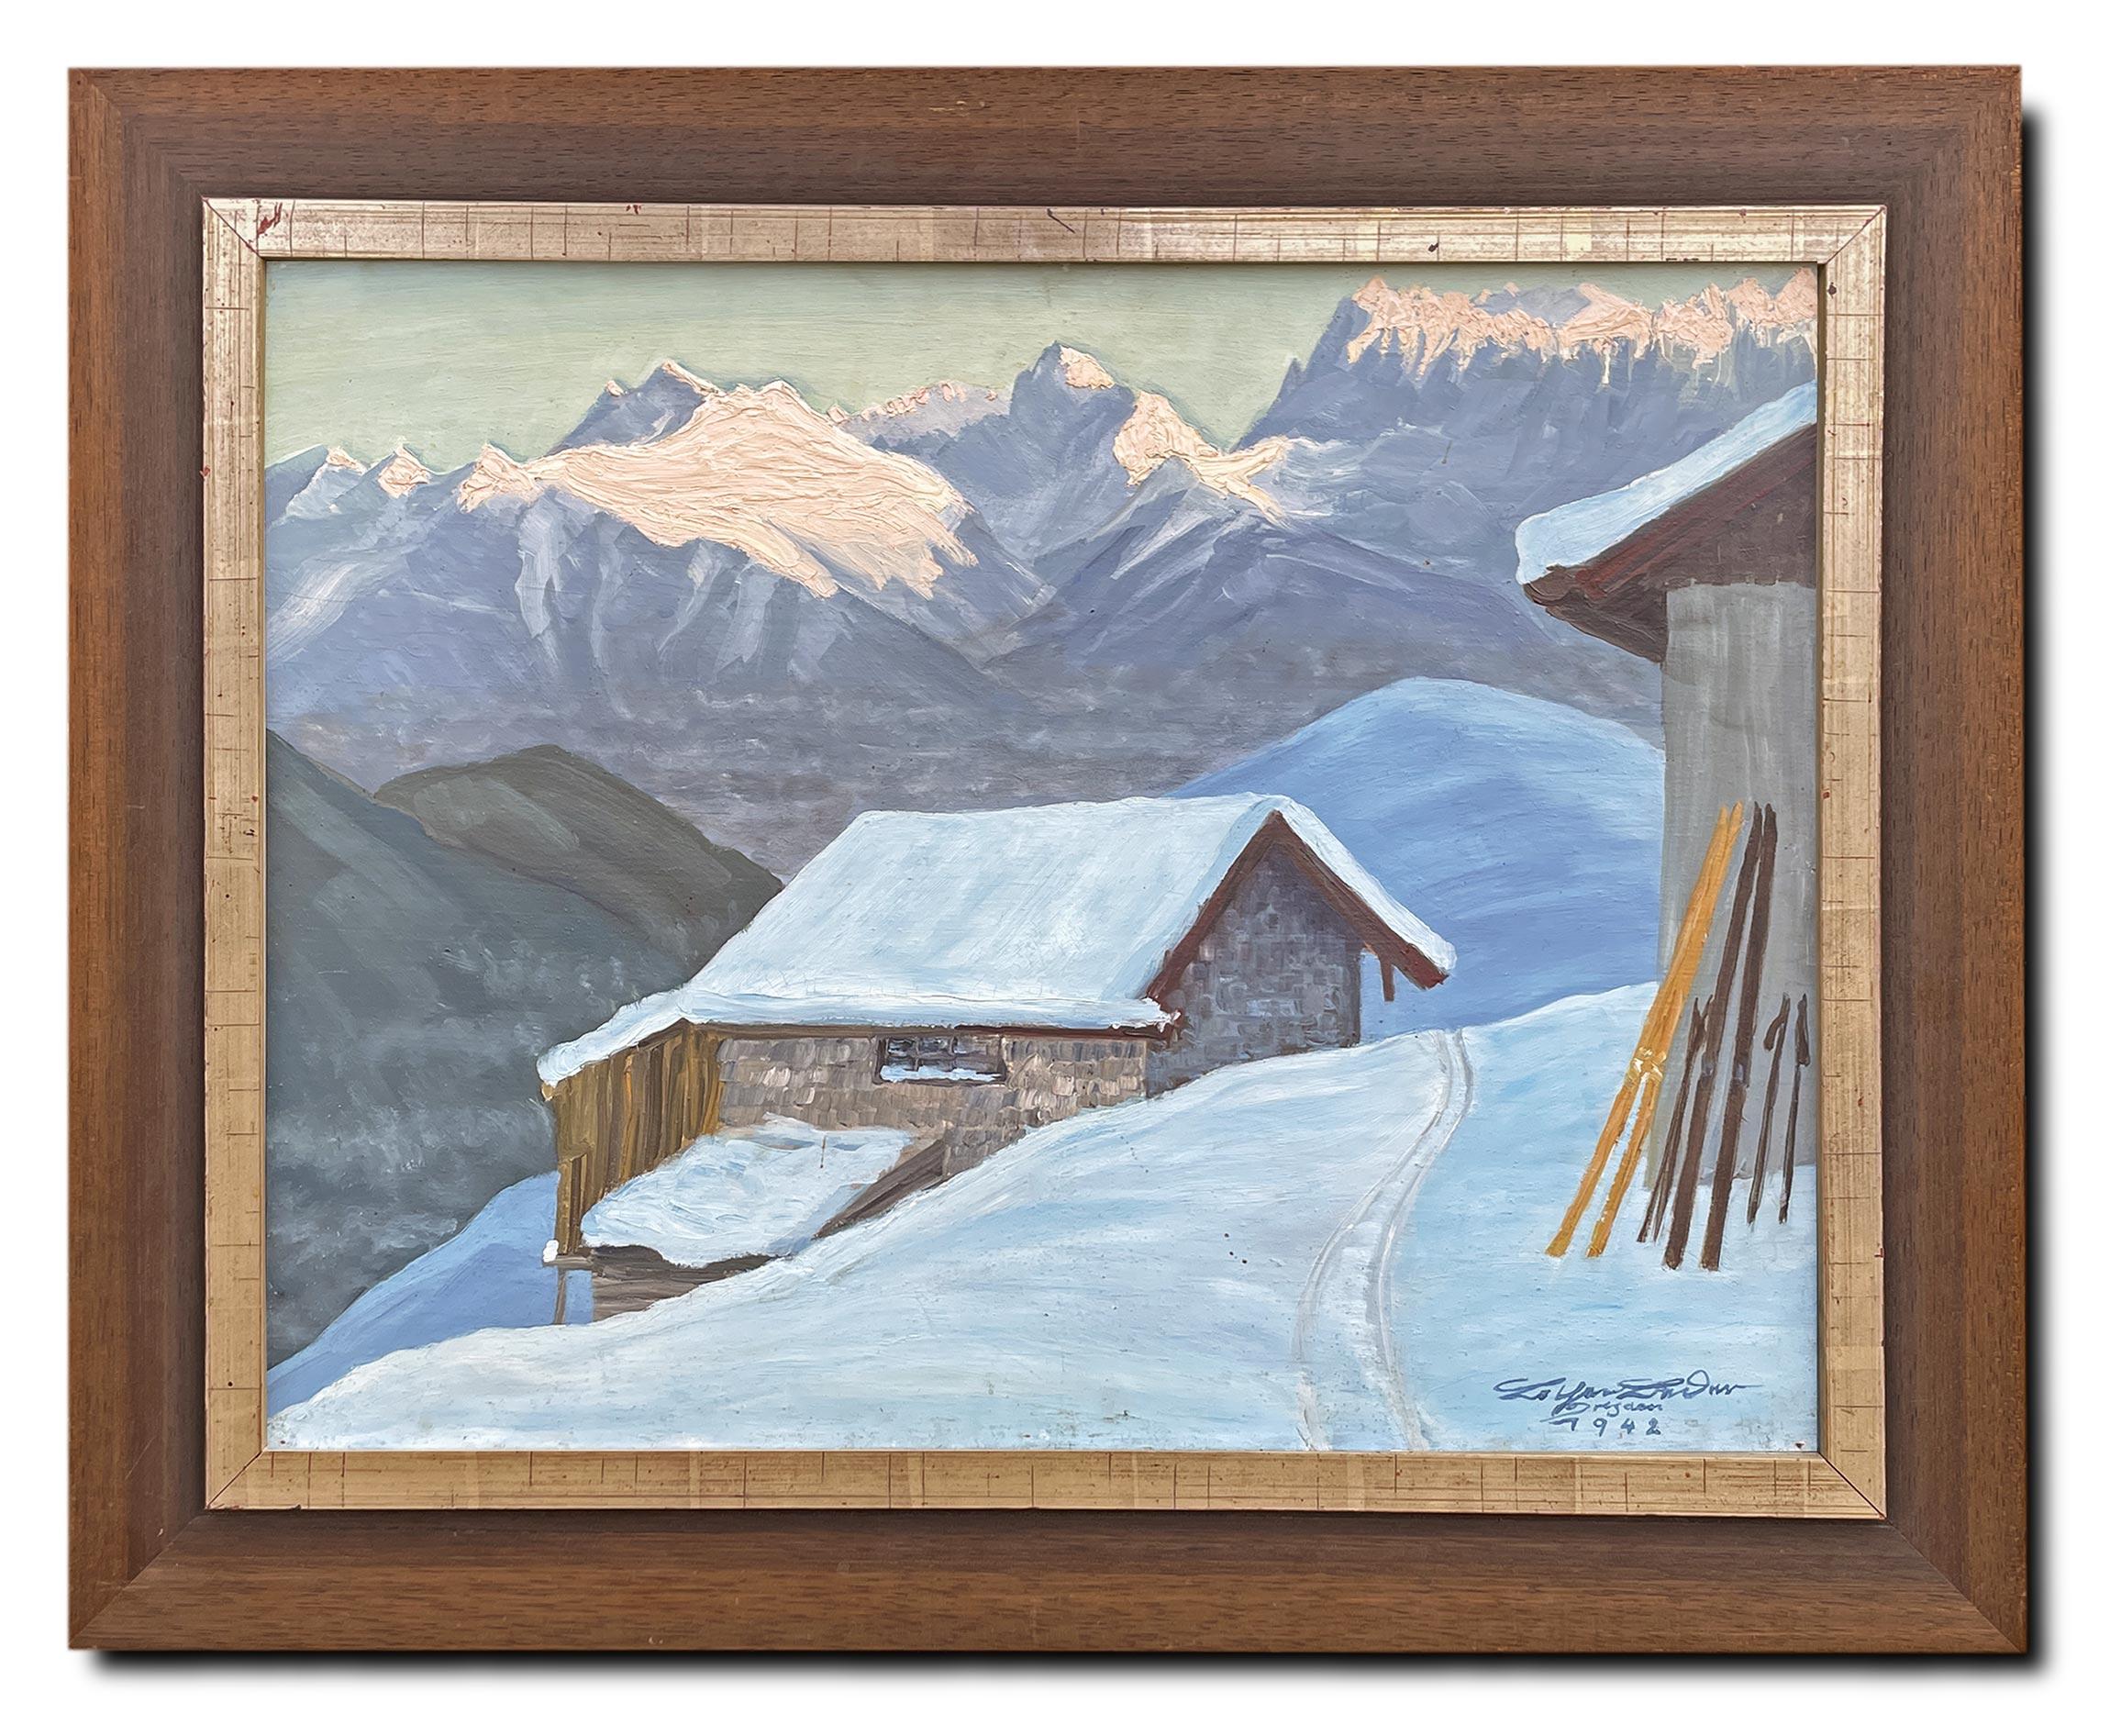 Lothar Bader – “Last Light”
CODE: QM182
50 cm x 65 cm – without frame
66 cm x 81 cm – with frame
Oil on panel
1942

It’s afternoon now and the sun’s rays illuminate only the snow-capped peaks, while the atmosphere is tinged with light blue and blue,